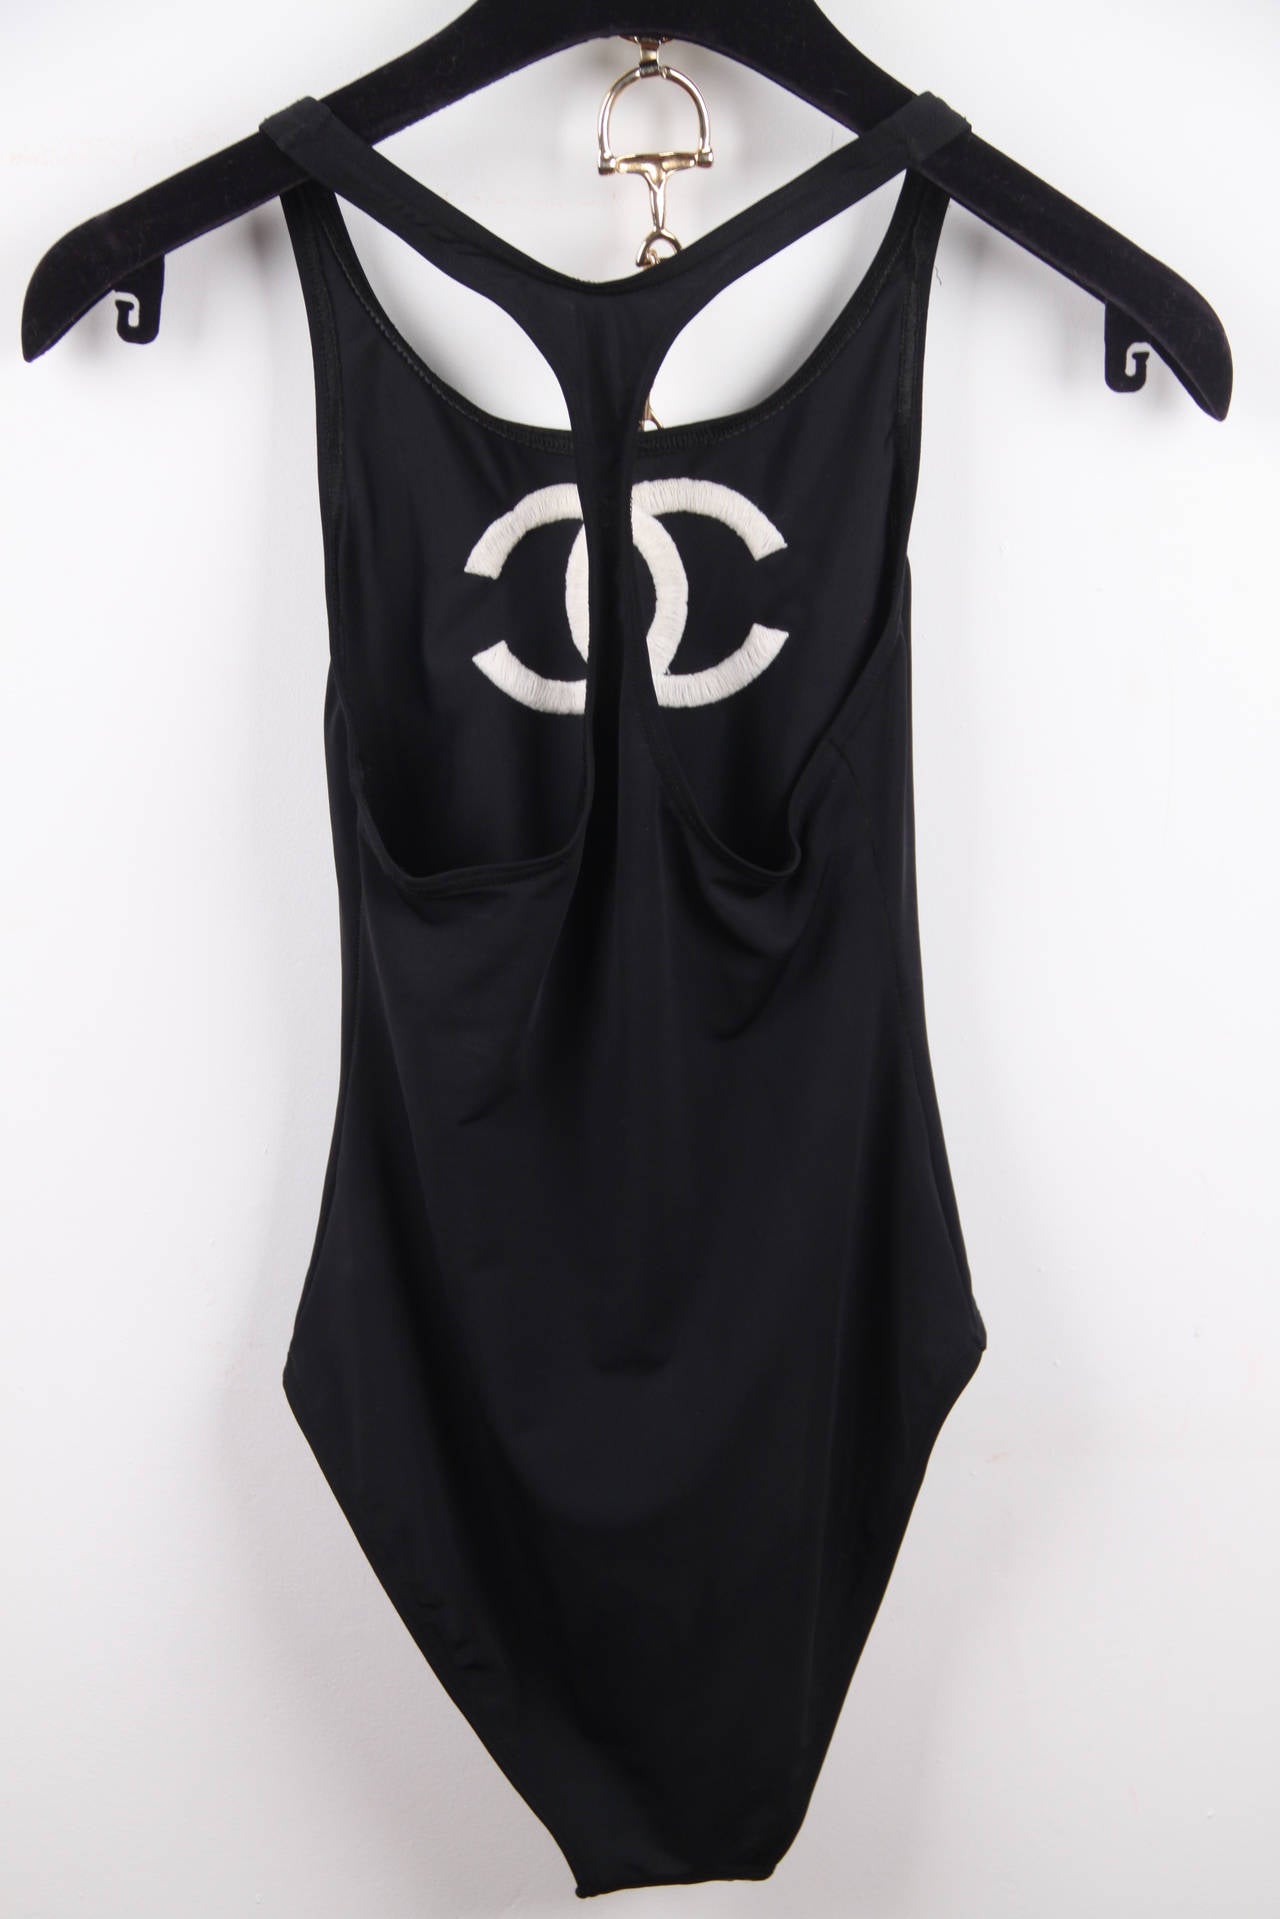 chanel swimsuit 2020 chanel swimsuit vintage chanel logo swimsuit chanel  one piece bodysuit chanel inspired swimsuit poshmark chanel swimsuit chanel  one-p…